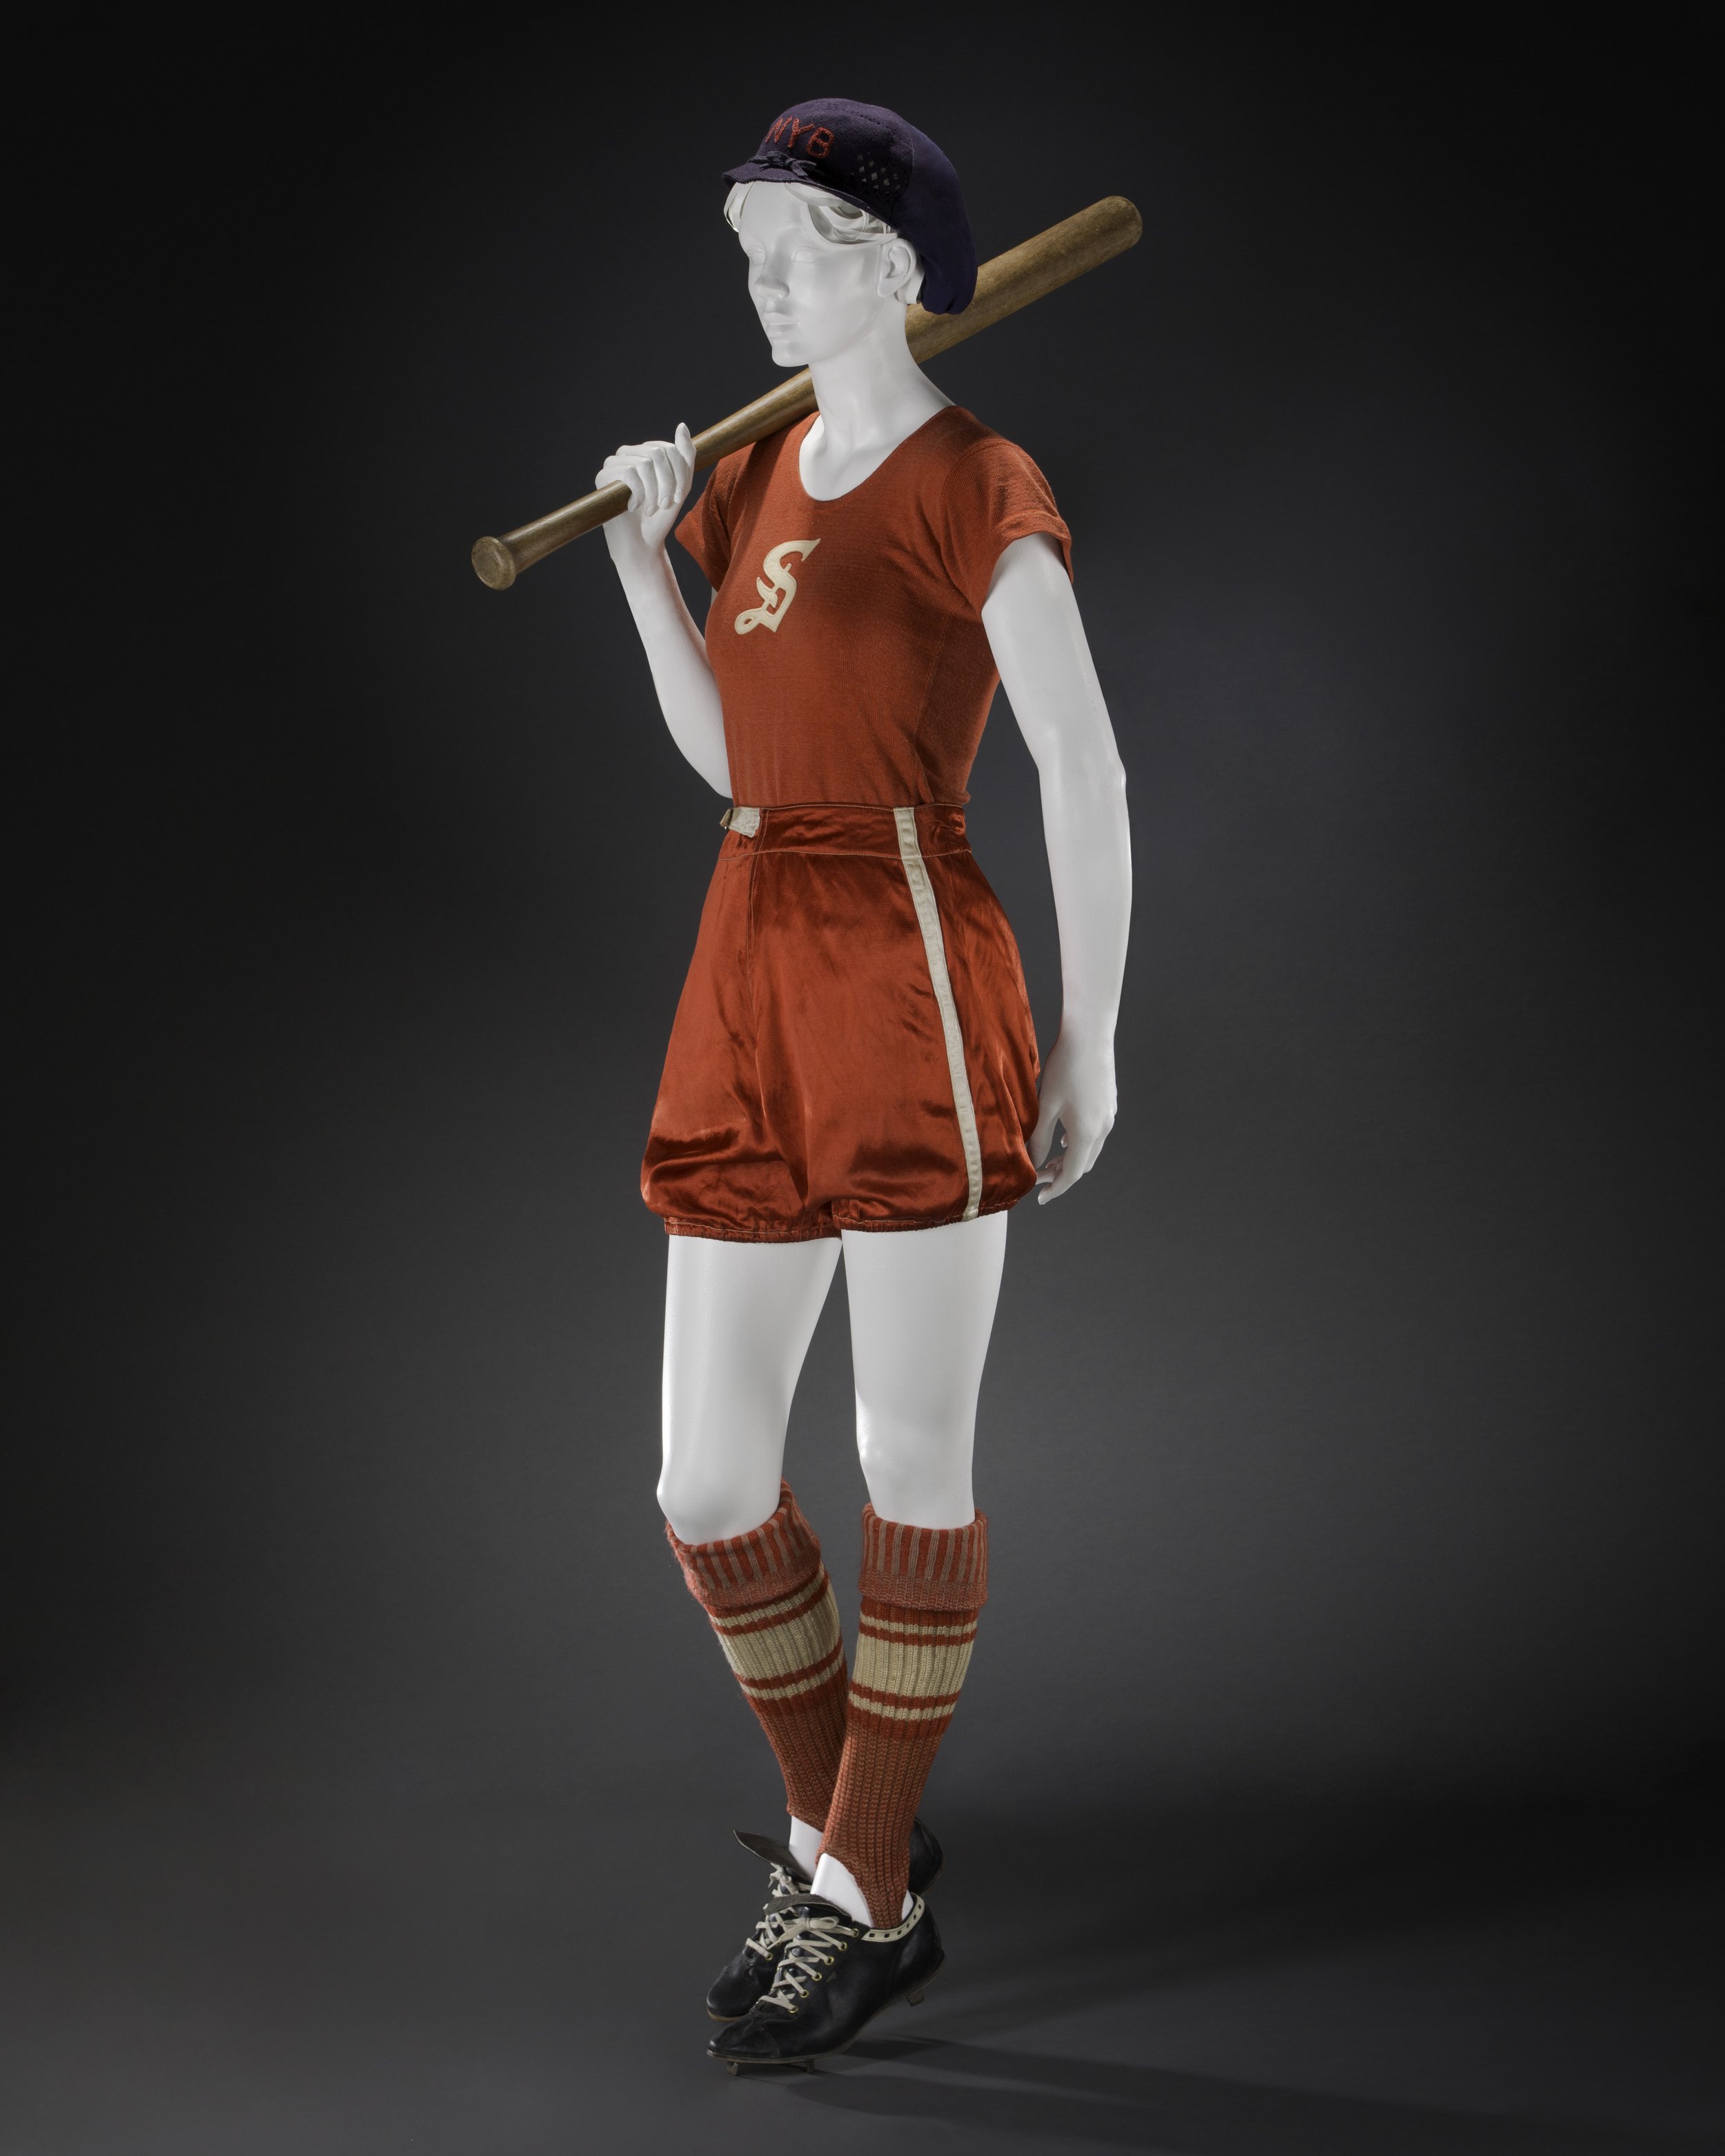  Baseball ensemble with Spalding cleats, 1930s Photo: Brian Davis © FIDM Museum CourtesyAmerican Federation of Arts 